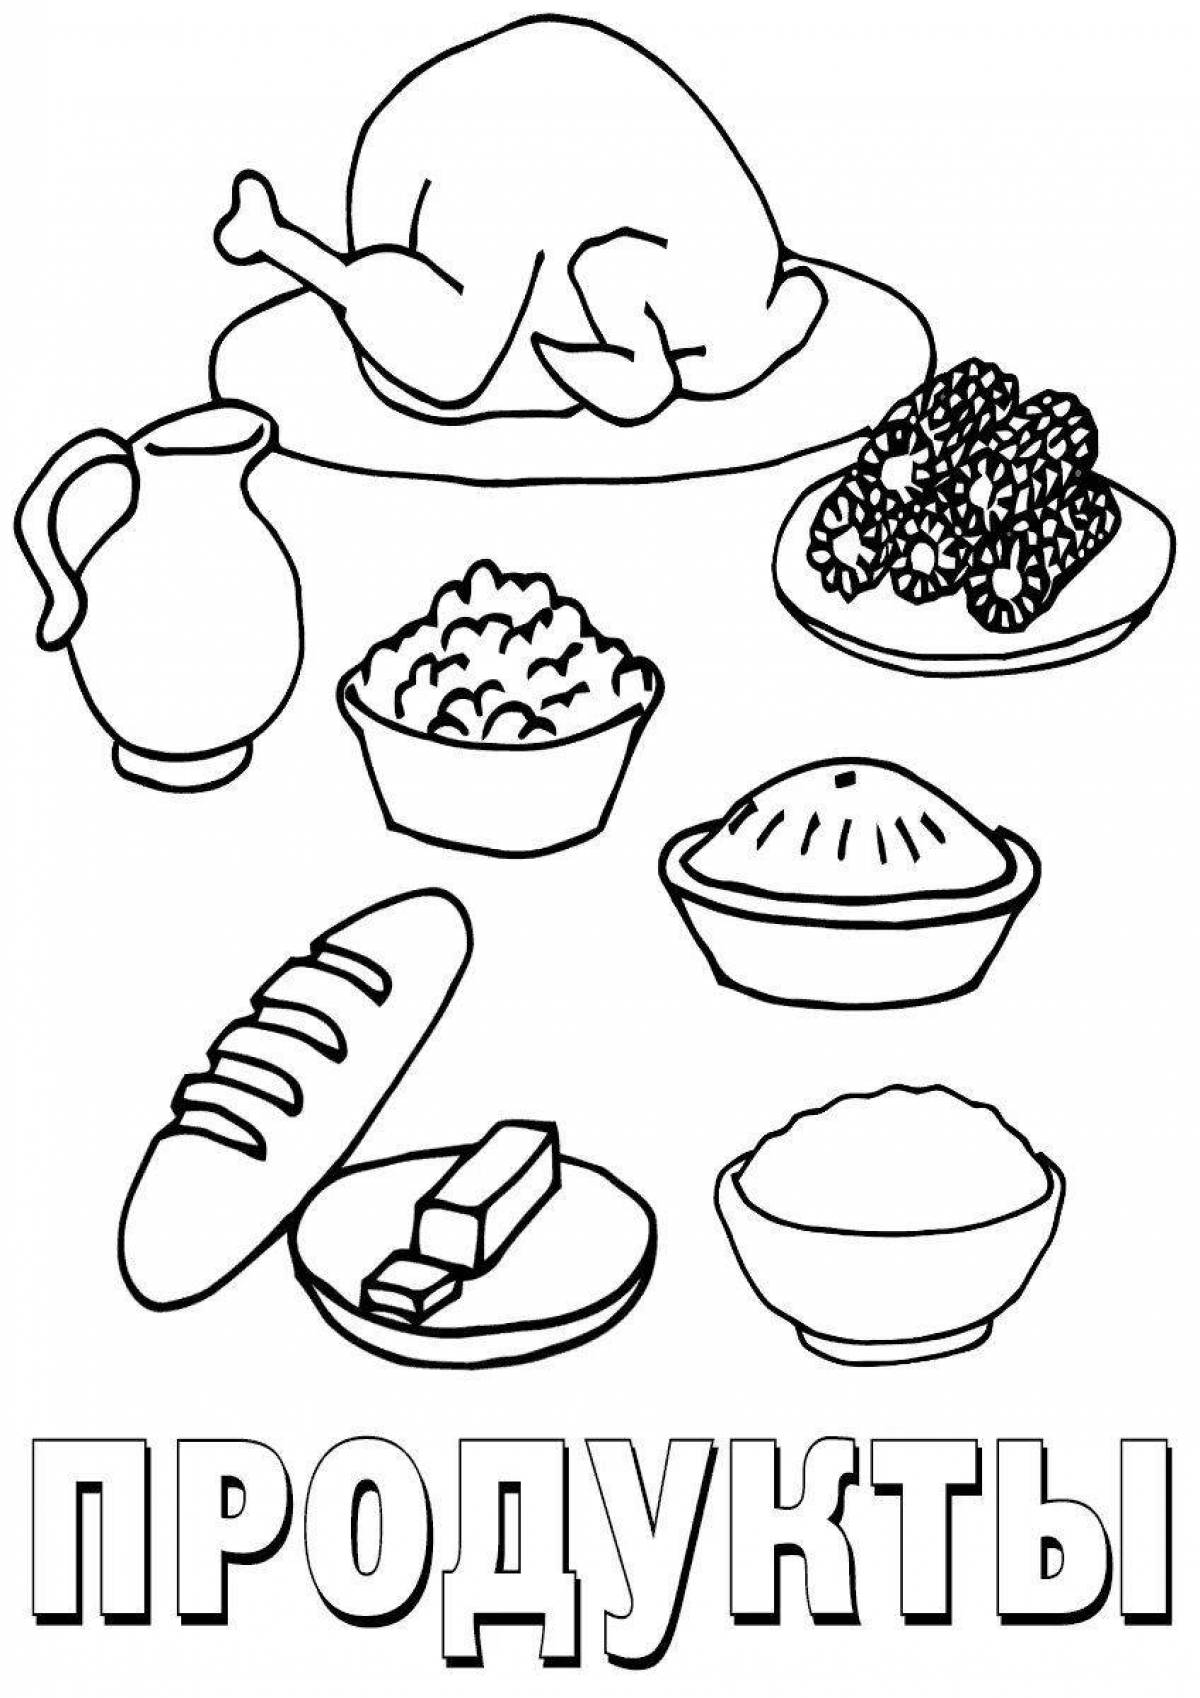 Colorful food coloring book for children aged 6-7